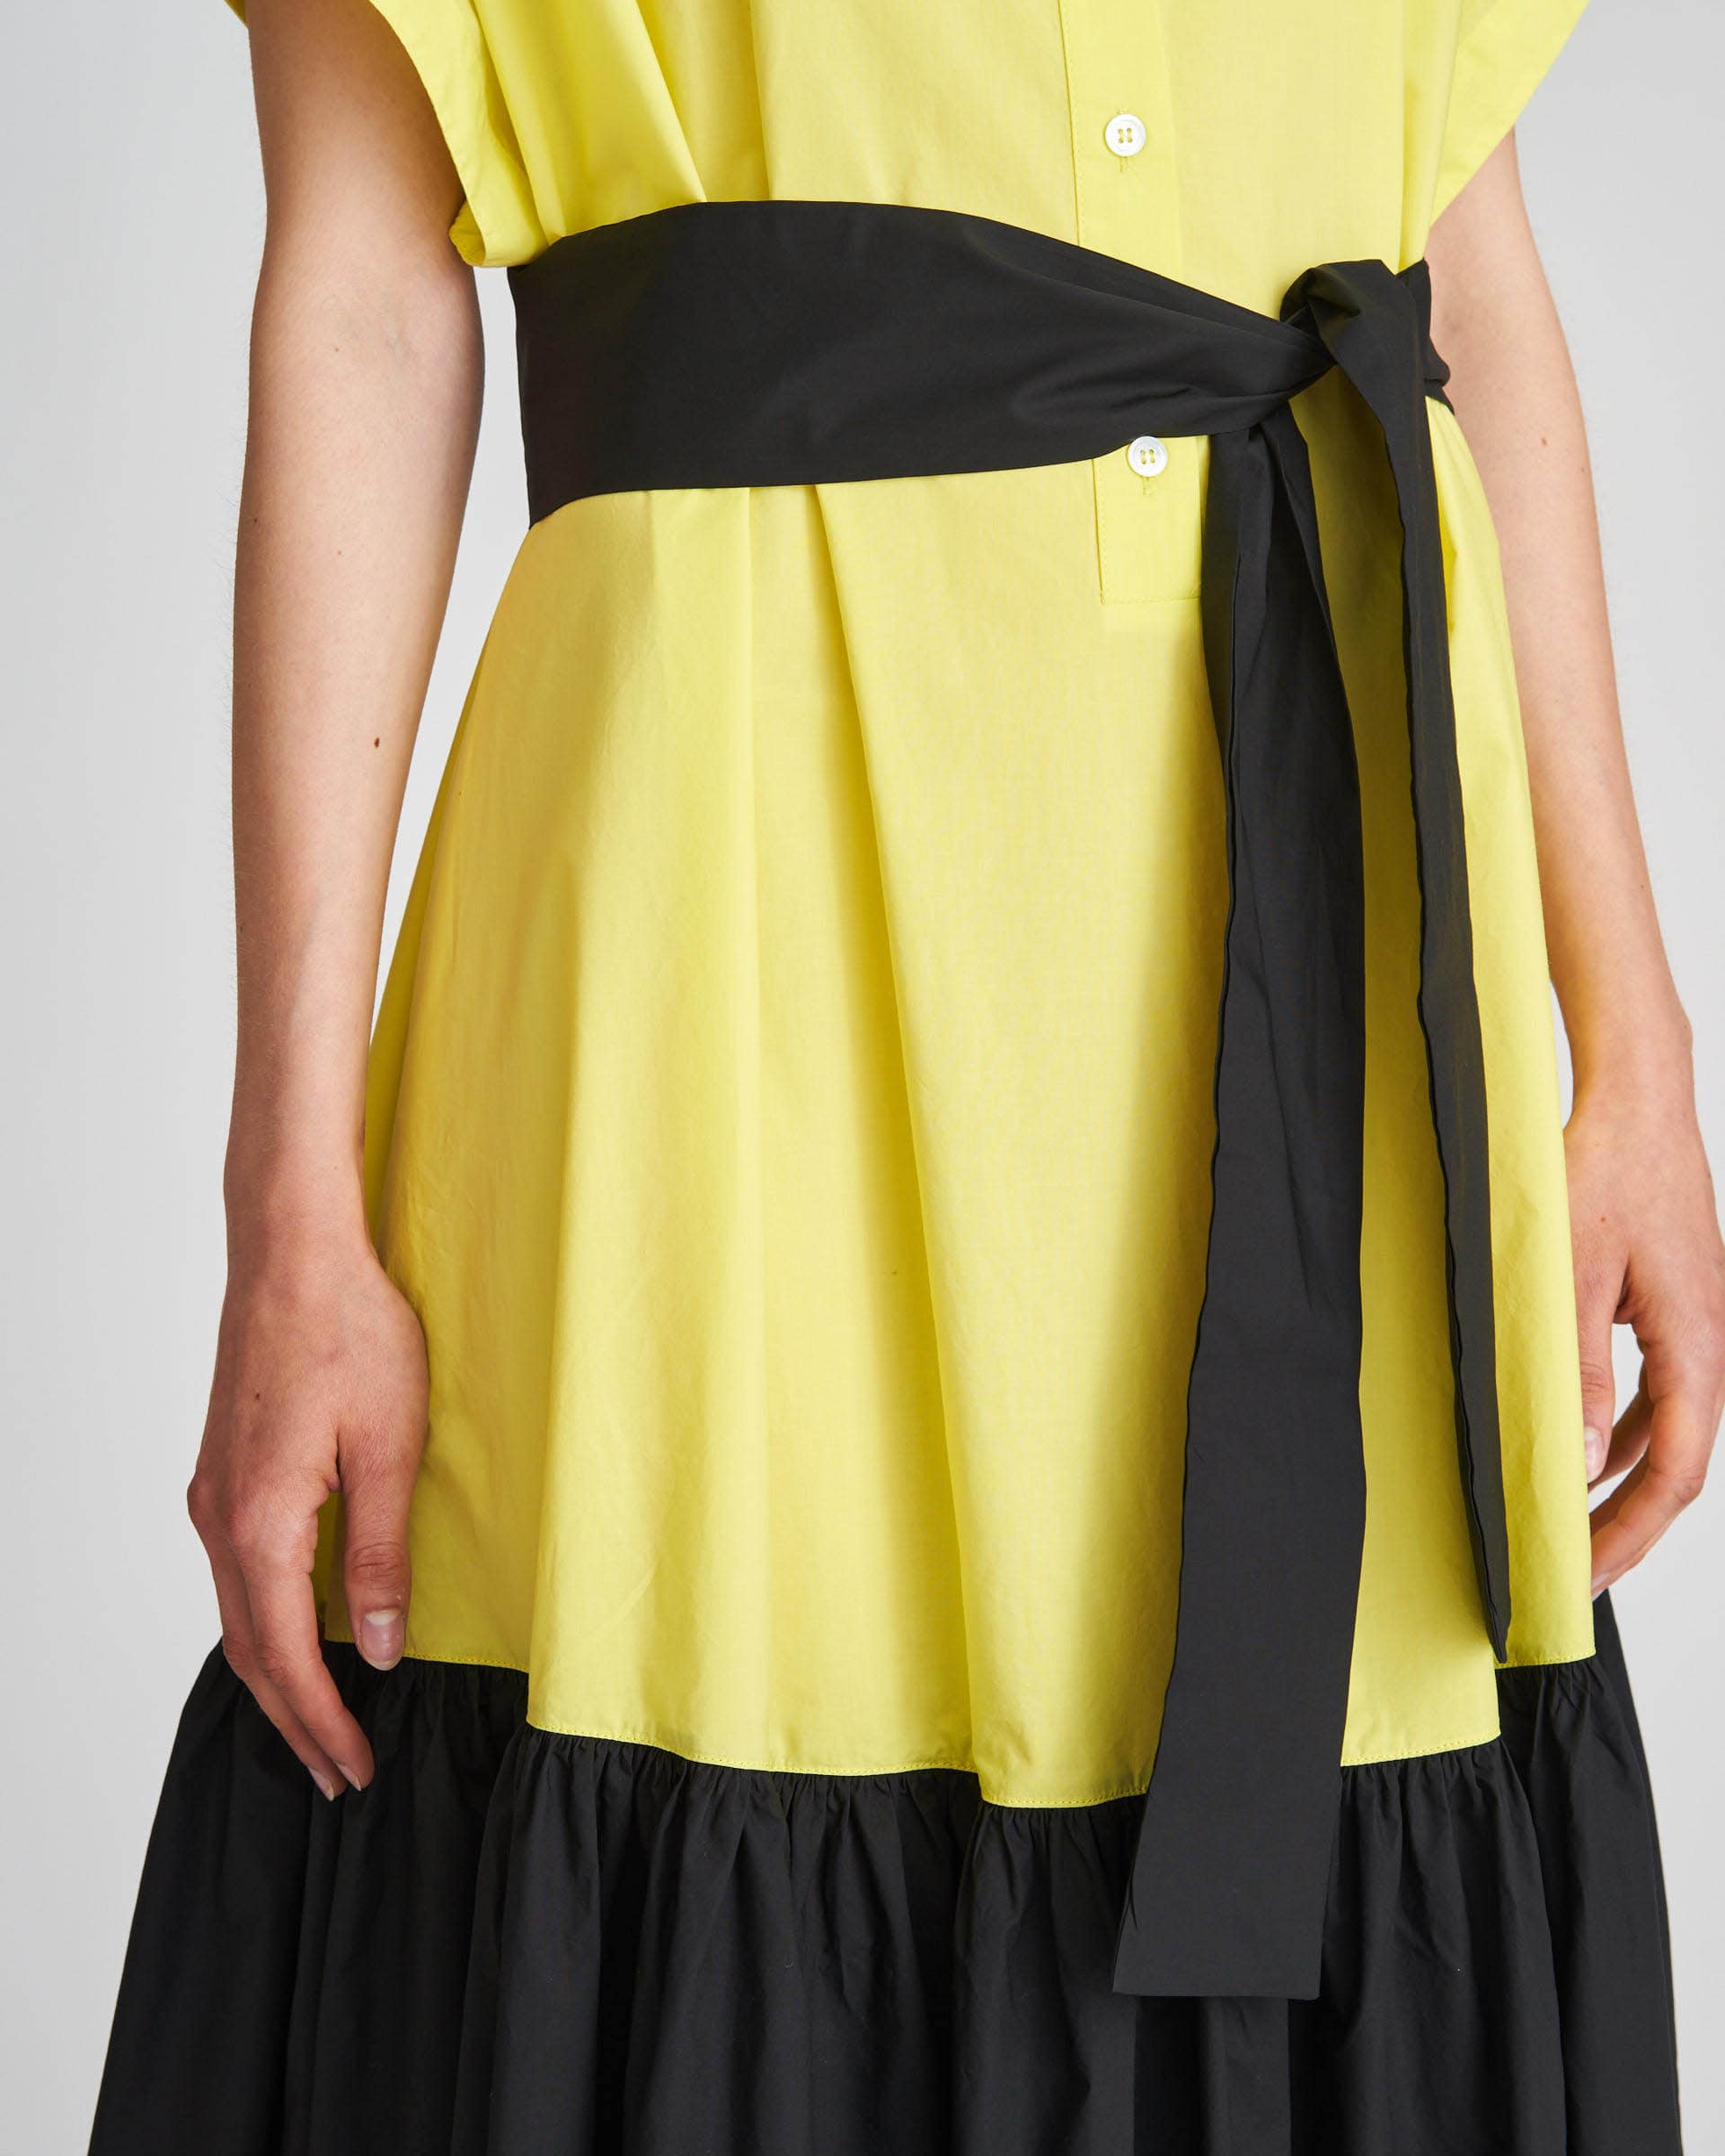 The Market Store | Two-tone Polo Dress With Belt